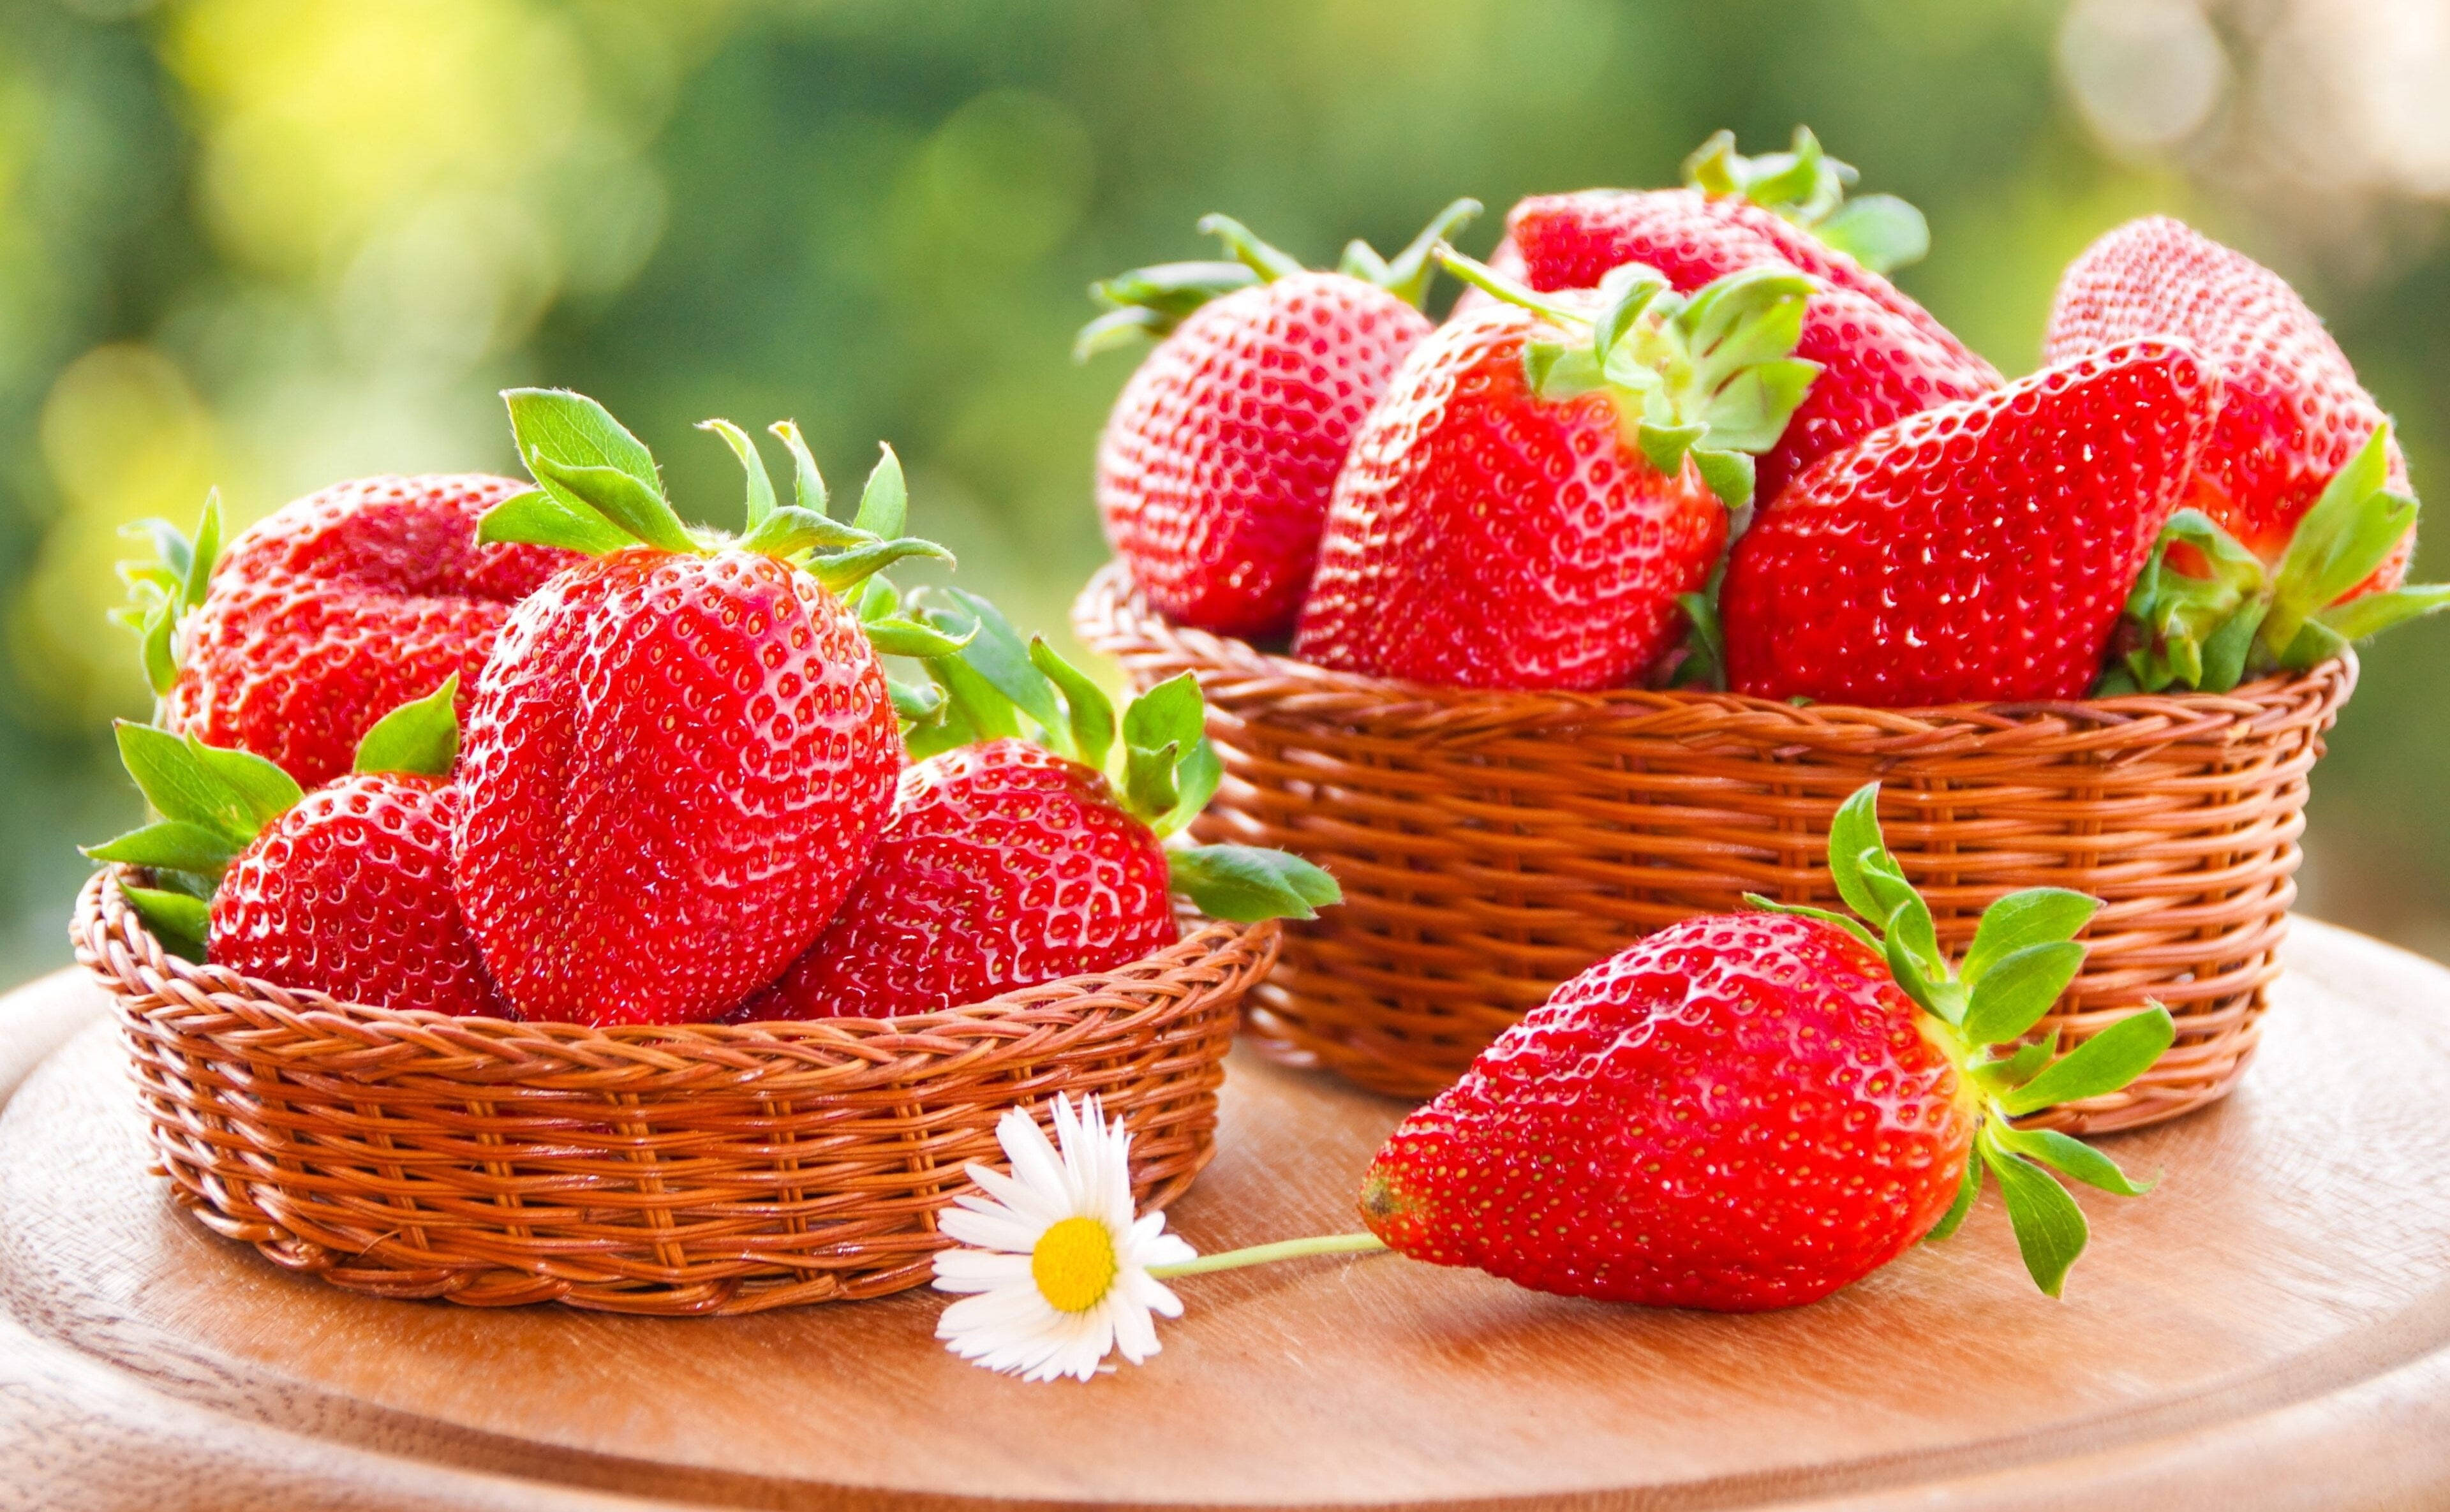 Woven Baskets Filled With Strawberry Desktop Wallpaper